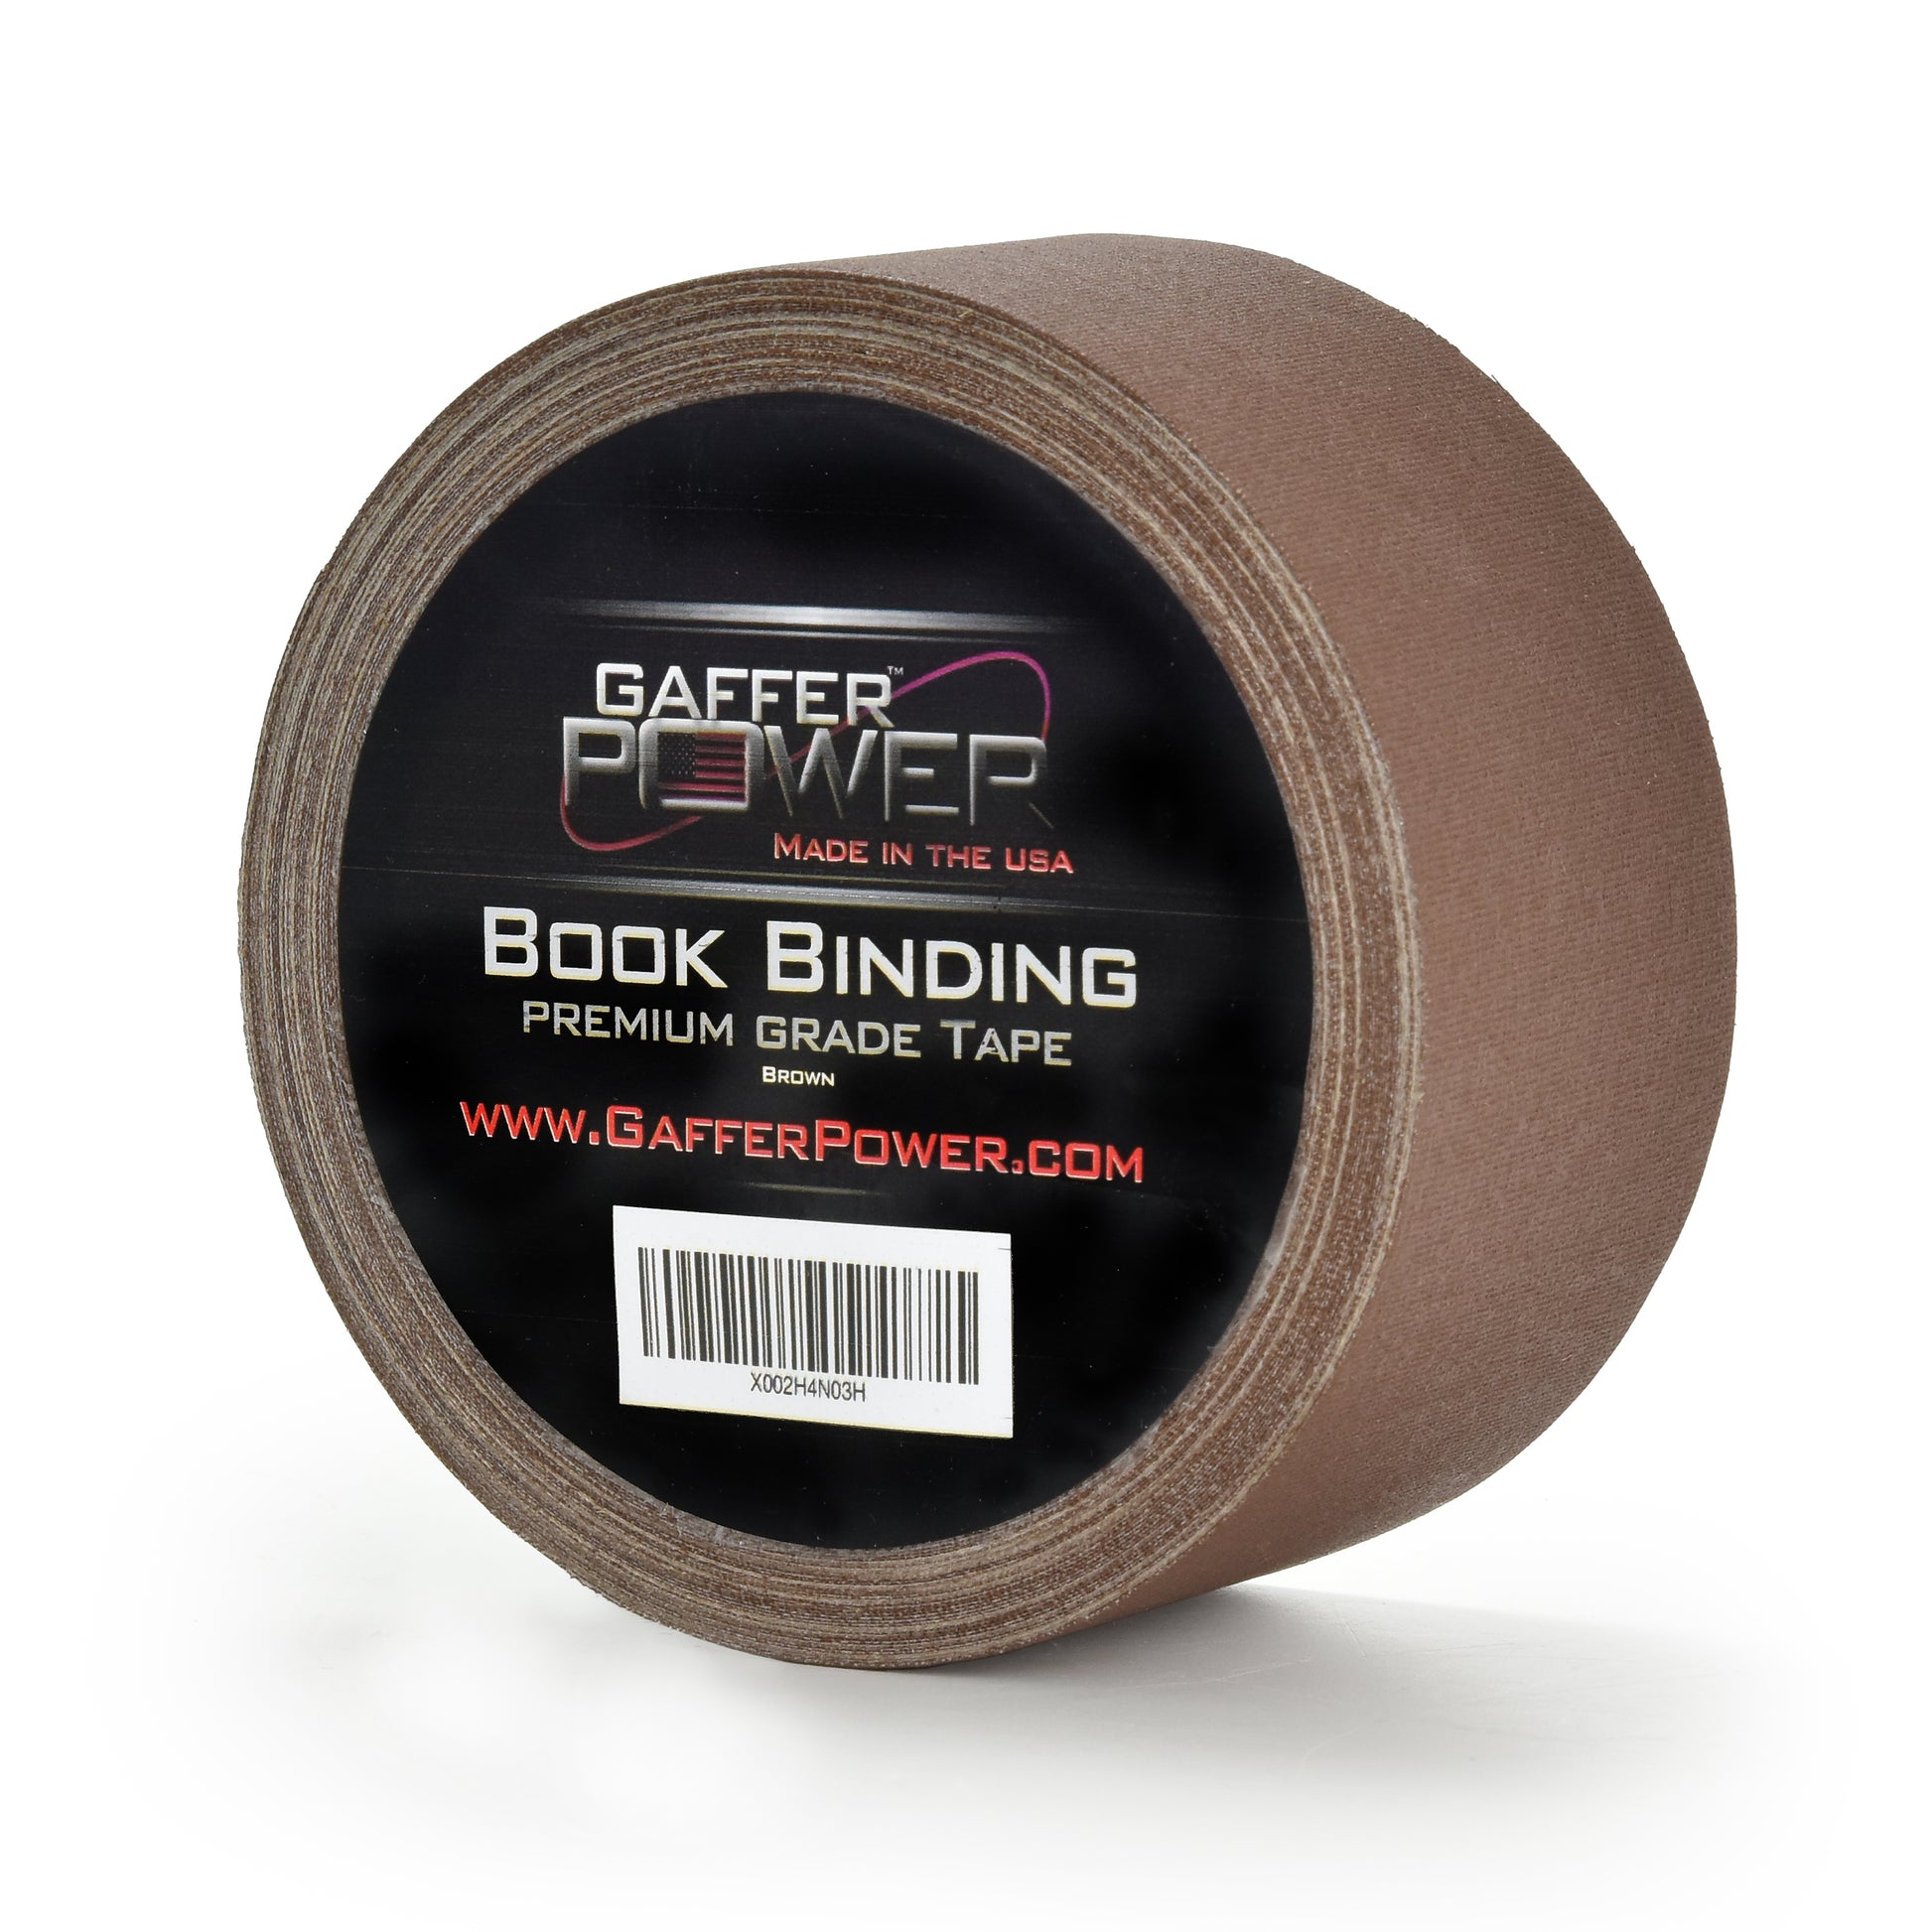 Bookbinding Tape : GWJ Company, Better Pricing, Extensive Variety of  Supplies & Tools for The Printer